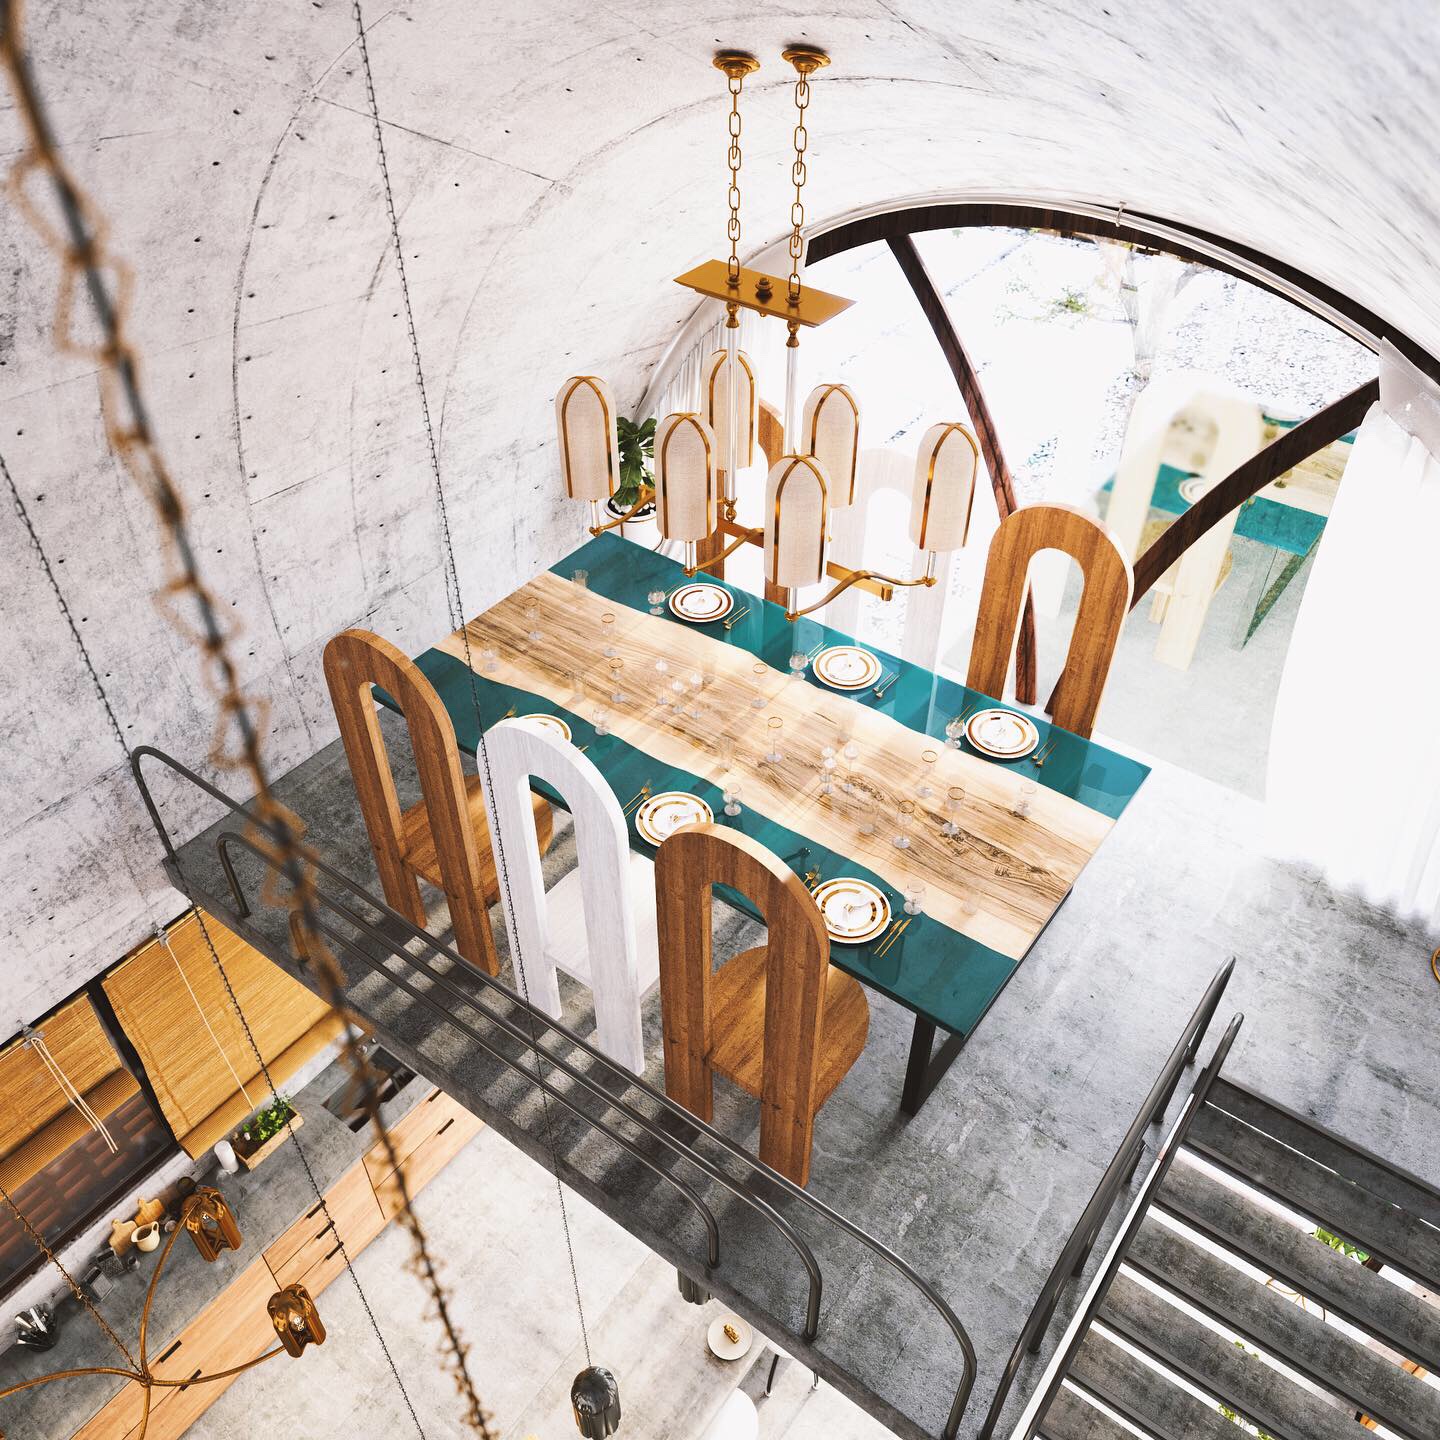 Middle East Modernism: 7 Projects Reimagining Traditional Islamic  Architecture